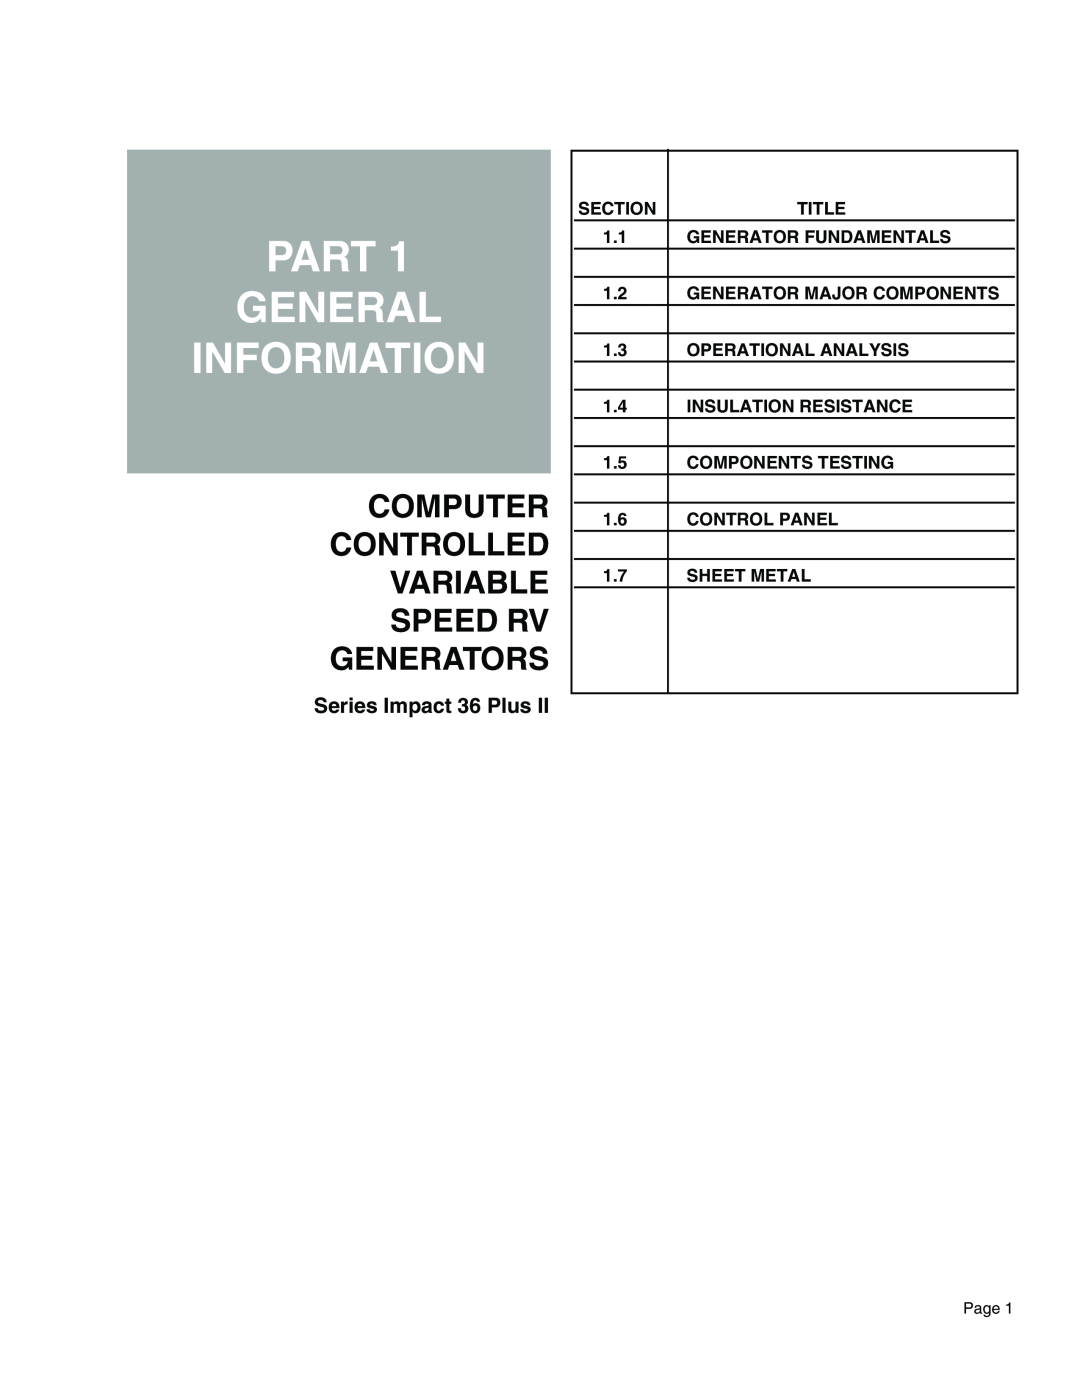 Generac Power Systems 941-2 Part General Information, Computer Controlled Variable Speed Rv Generators, Section, Title 